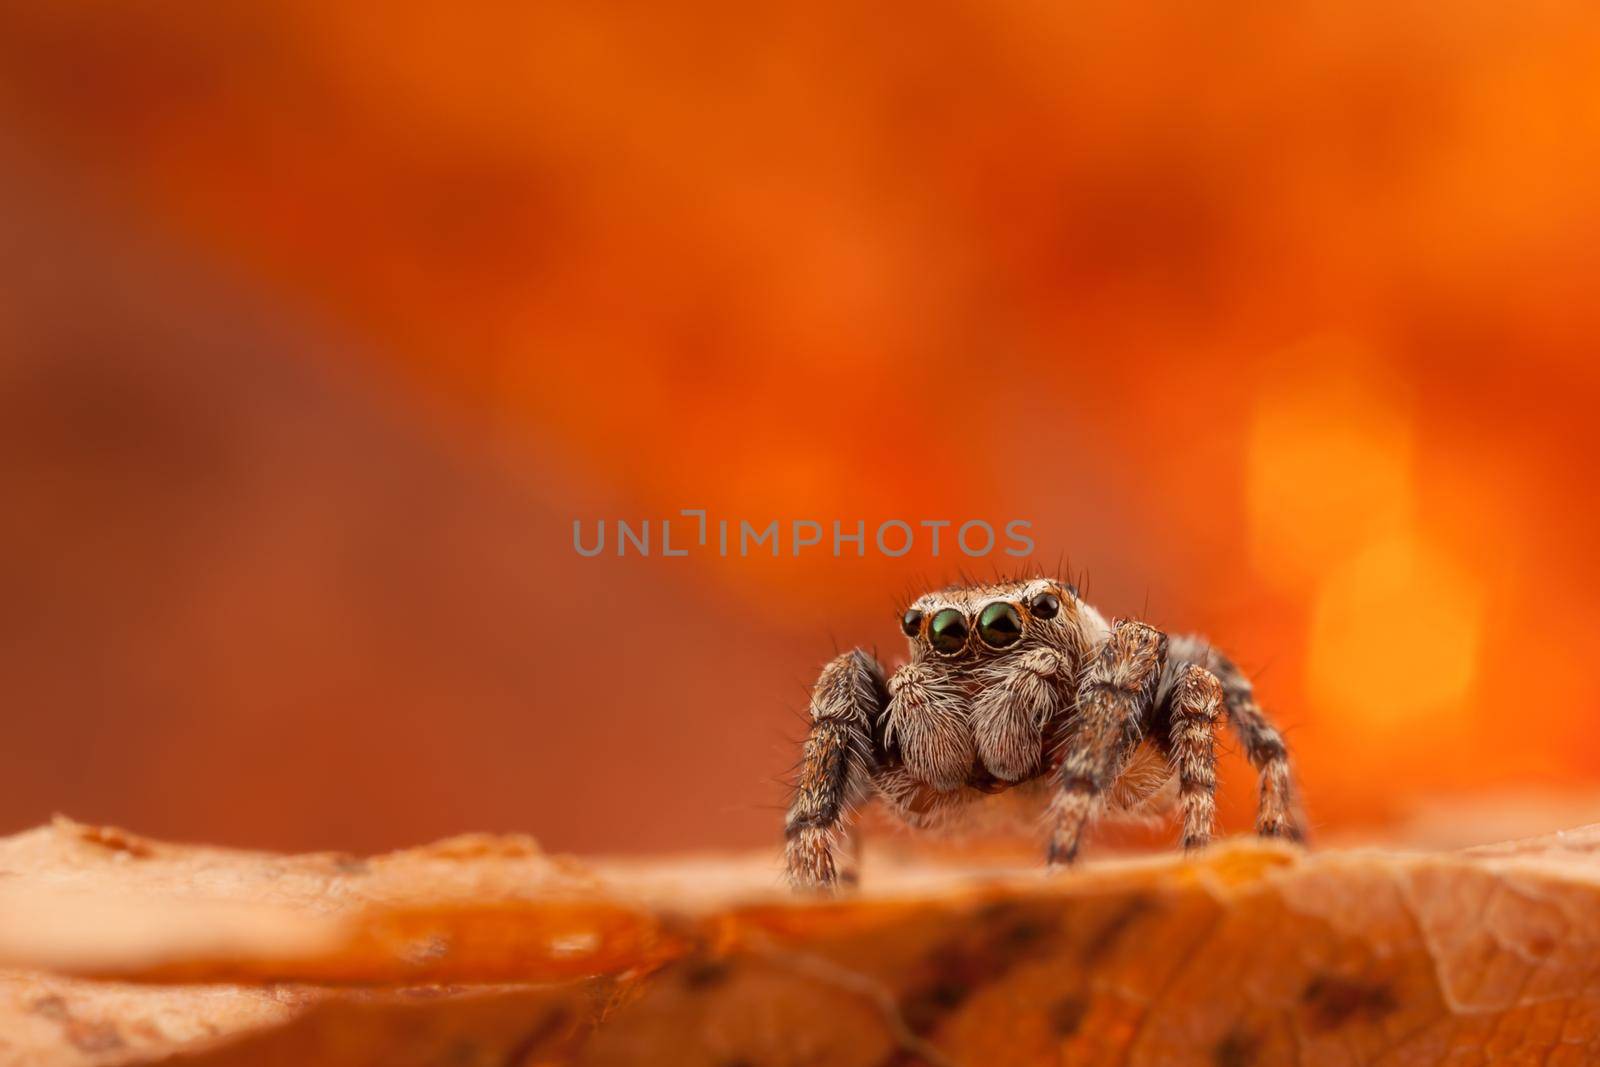 Jumping spider on the orange and shining leaf by Lincikas